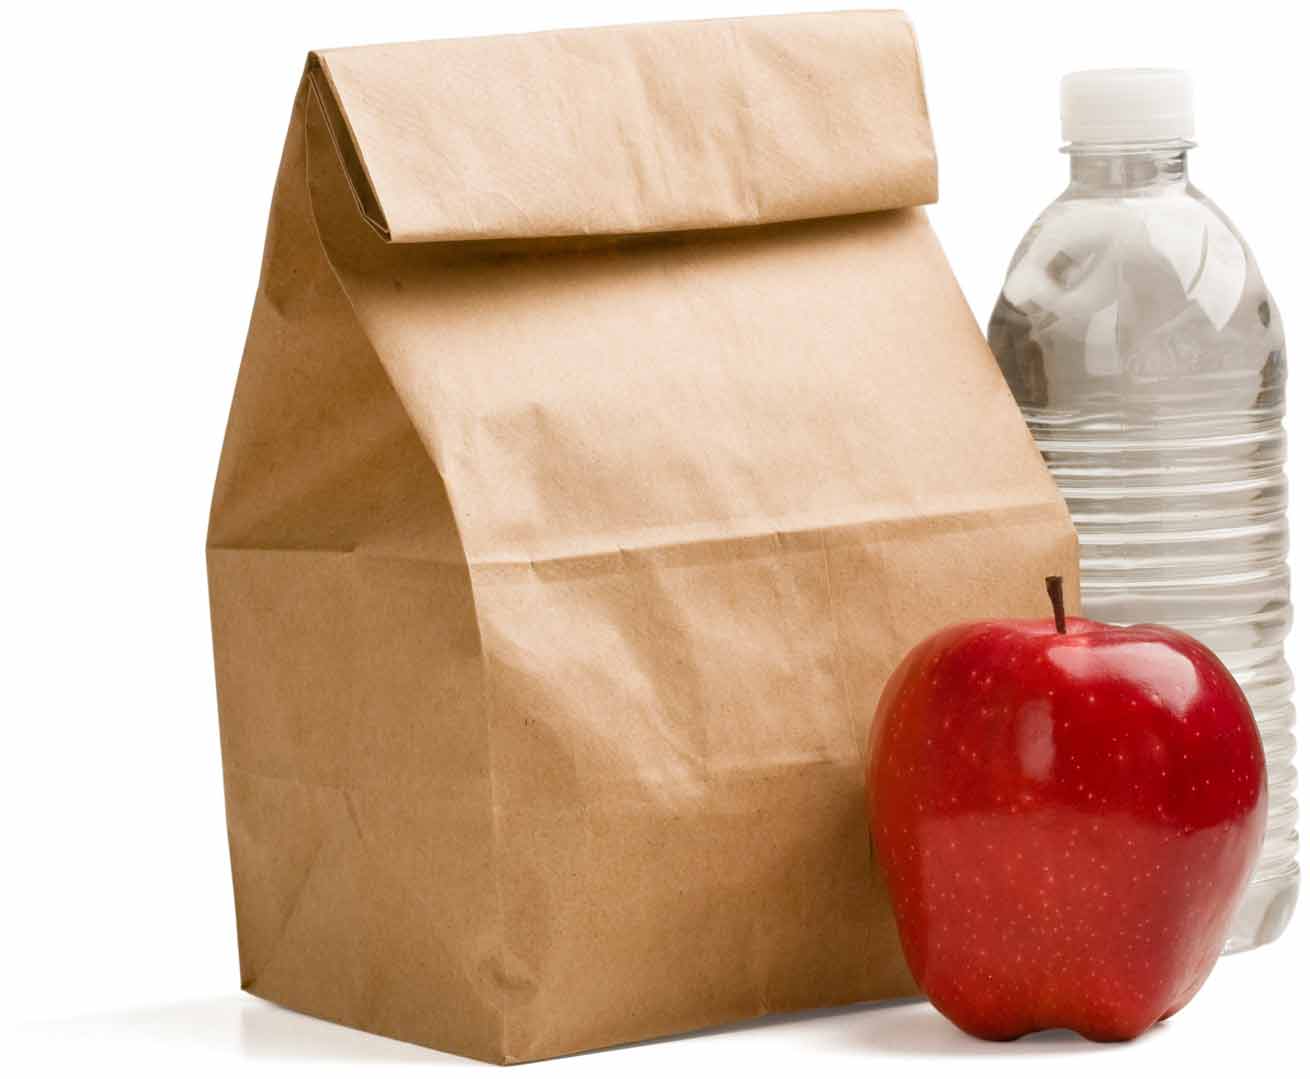 Build Sack Lunches and Deliver to Interfaith in Carlsbad